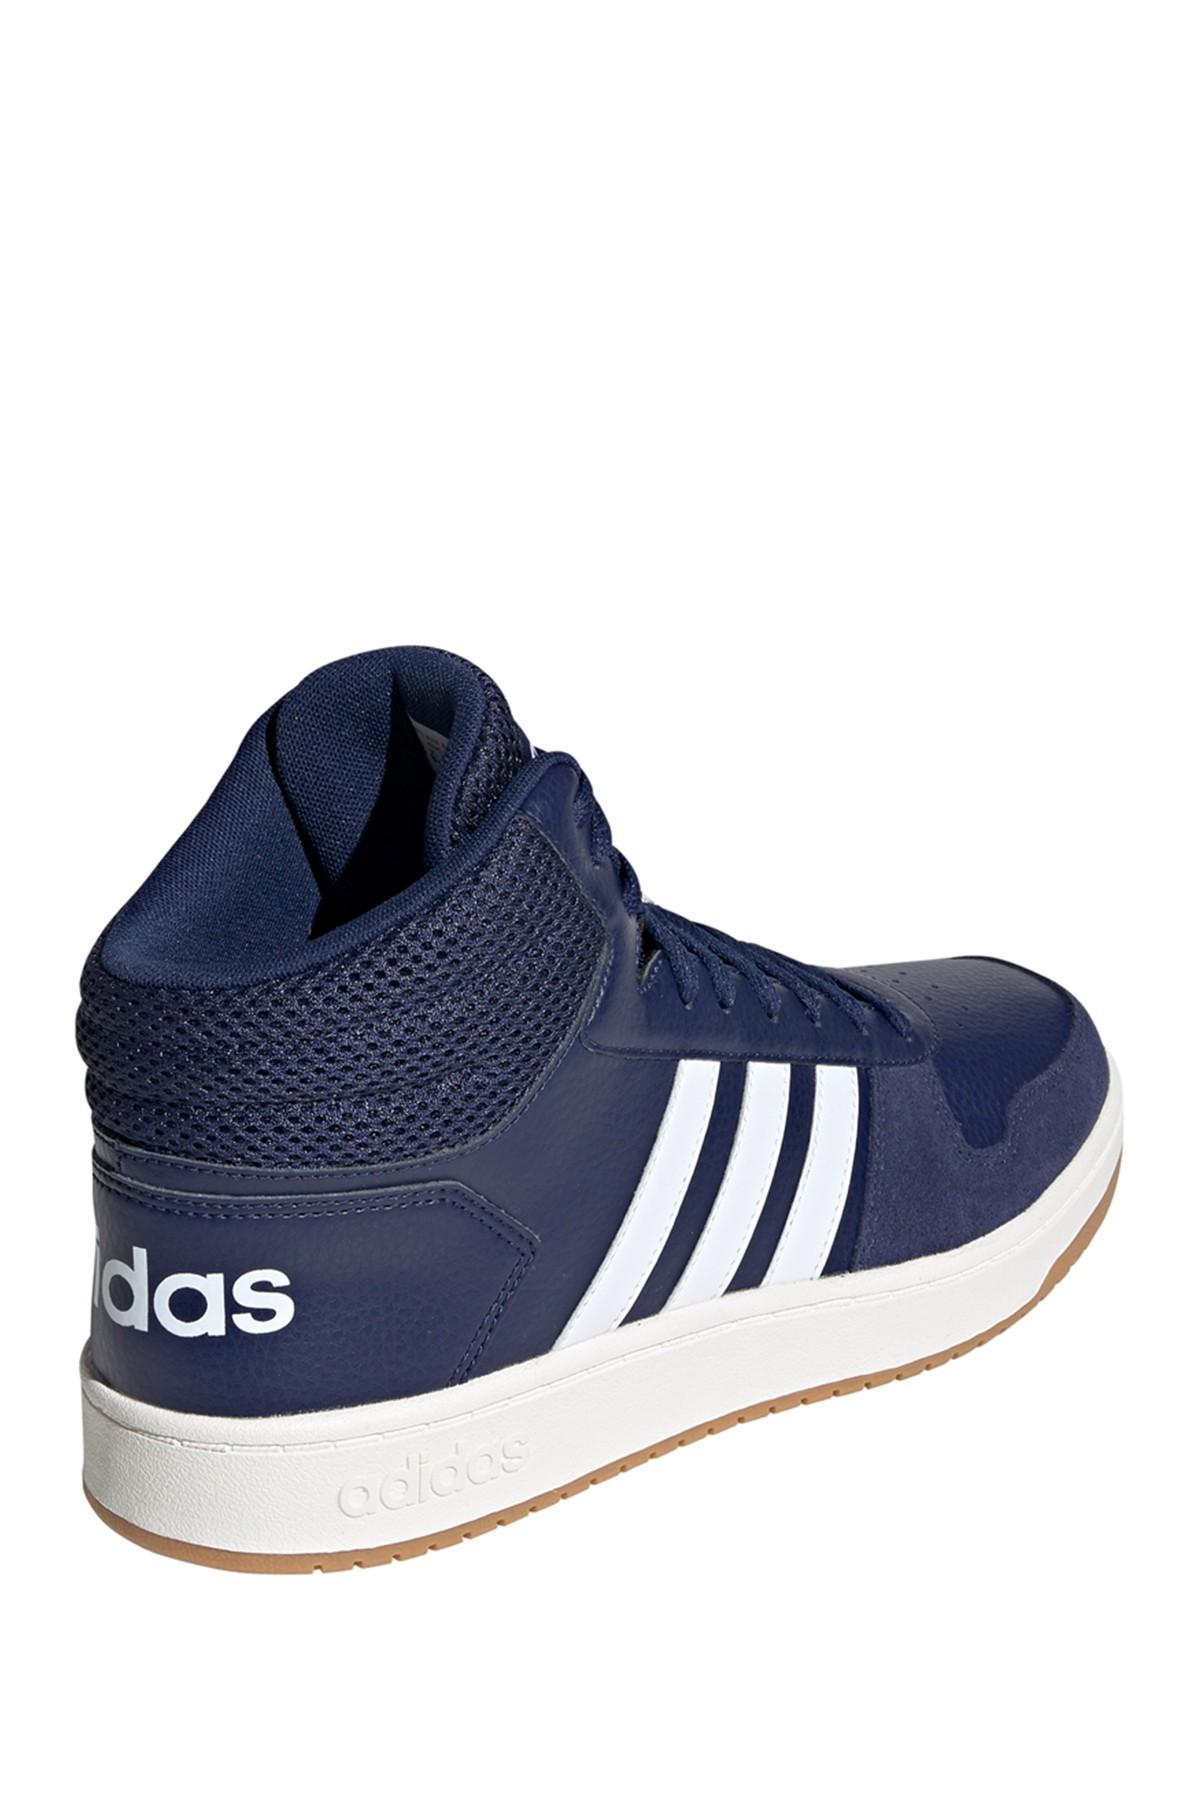 adidas Leather Hoops 2.0 Mid Sneaker in Navy (Blue) for Men - Lyst